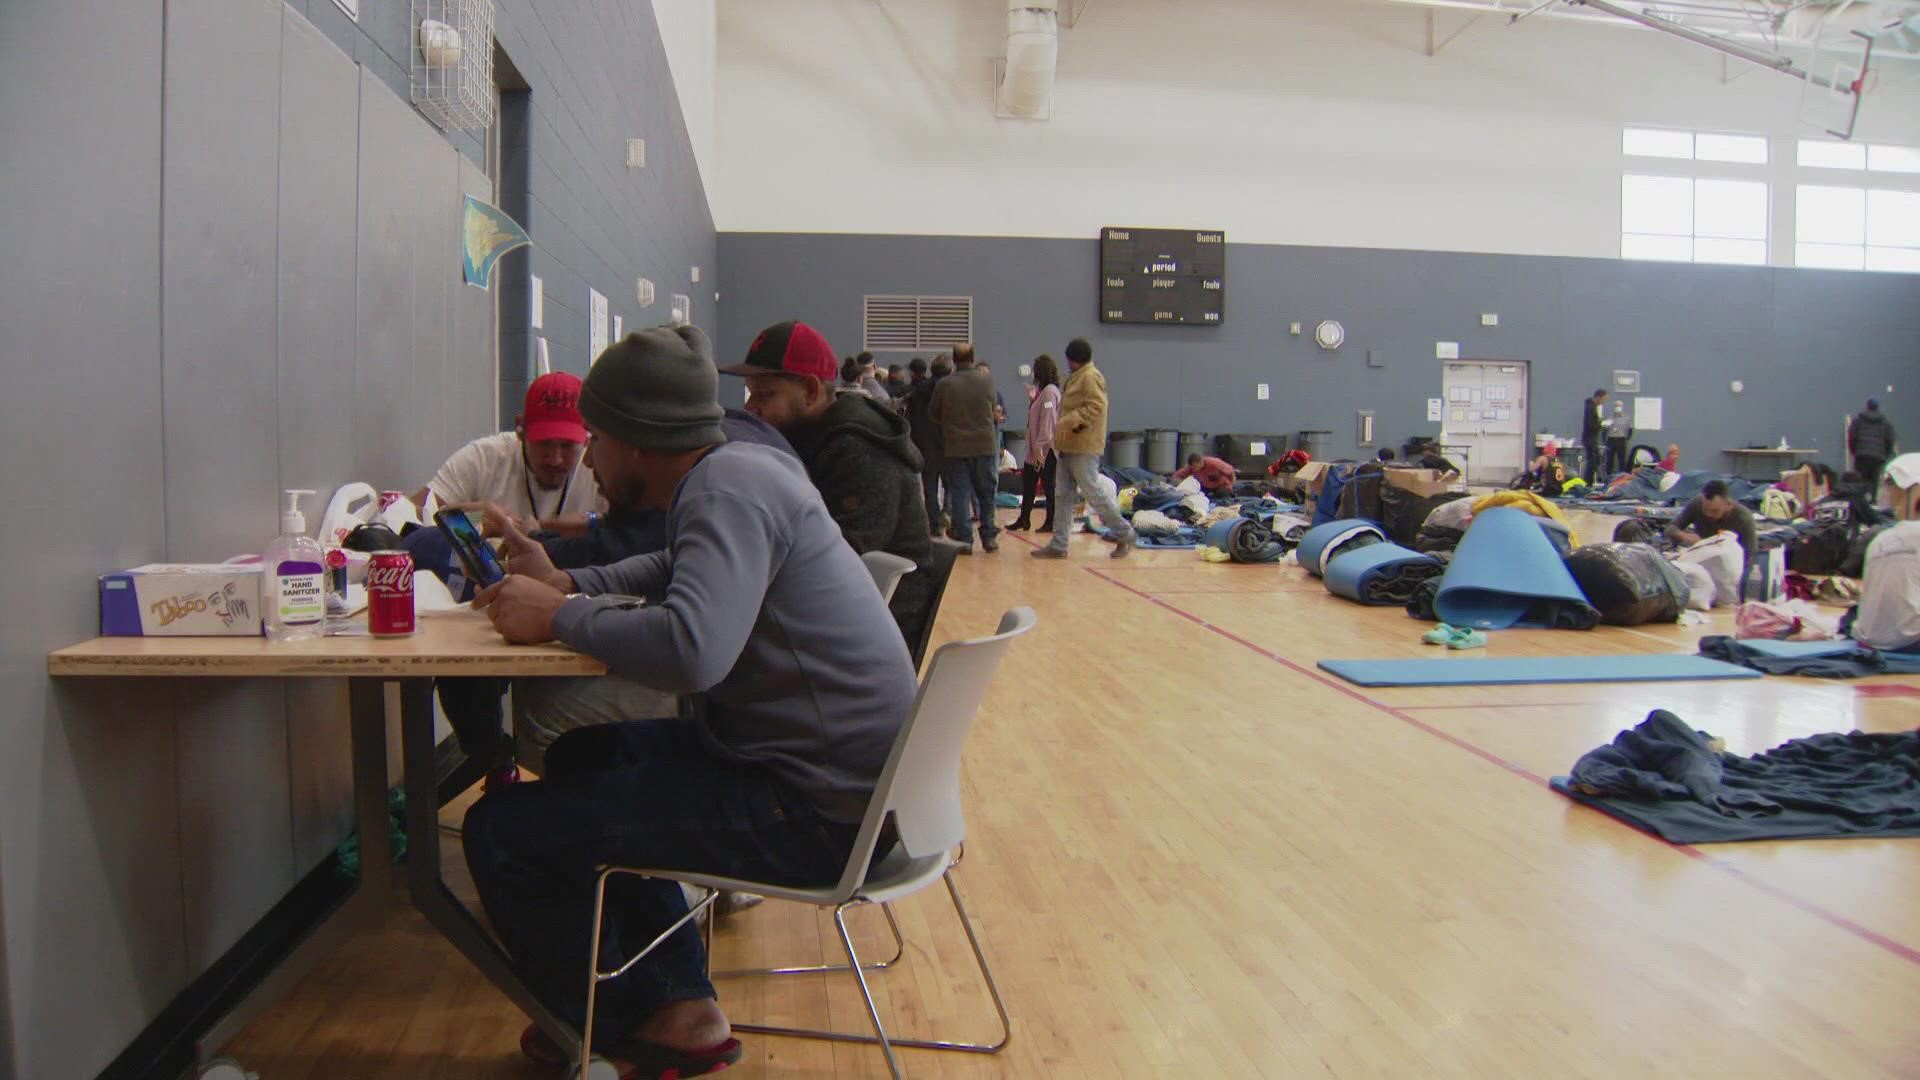 Some who have been saying at city-run shelters have found other alternatives with host families. Others are still working to come up with a plan.